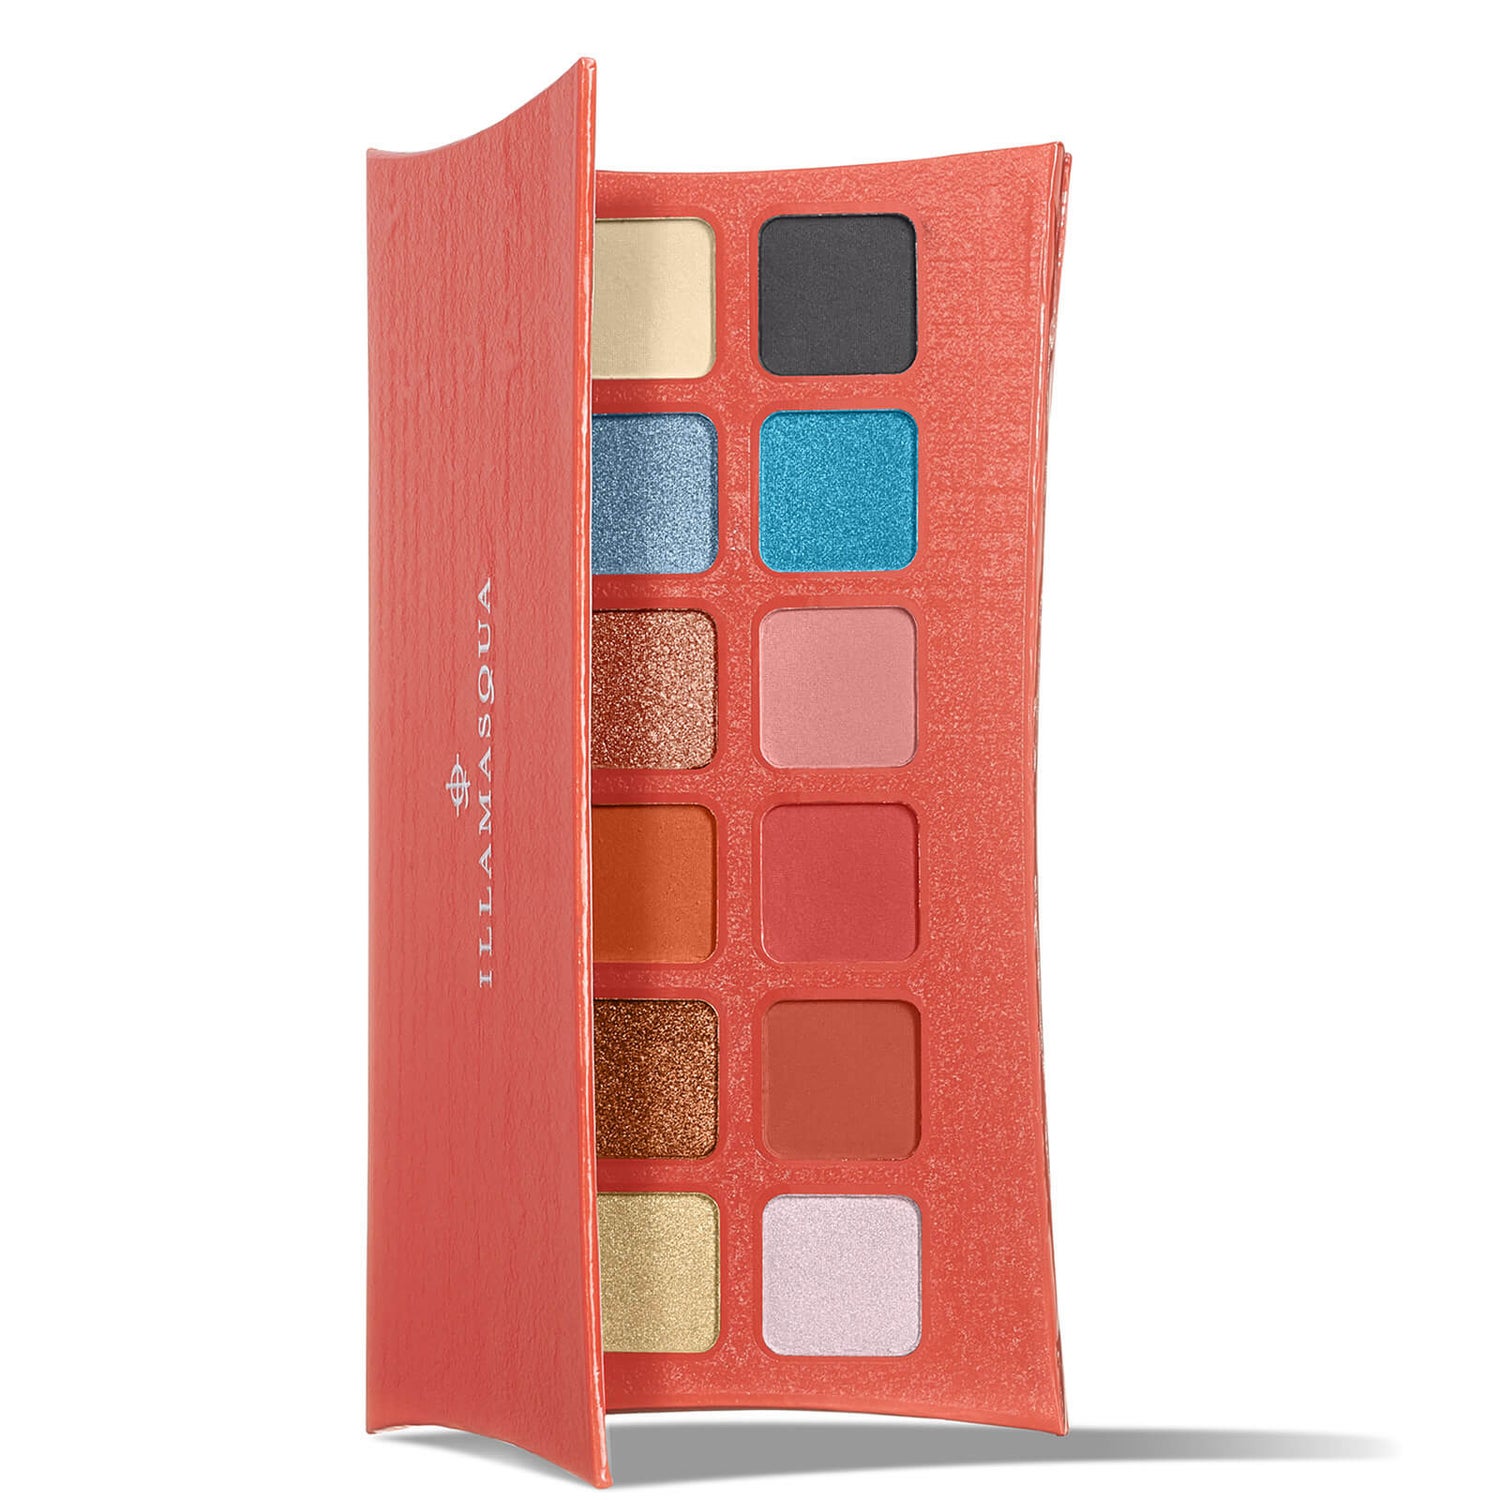 Expressionist Artistry Palette